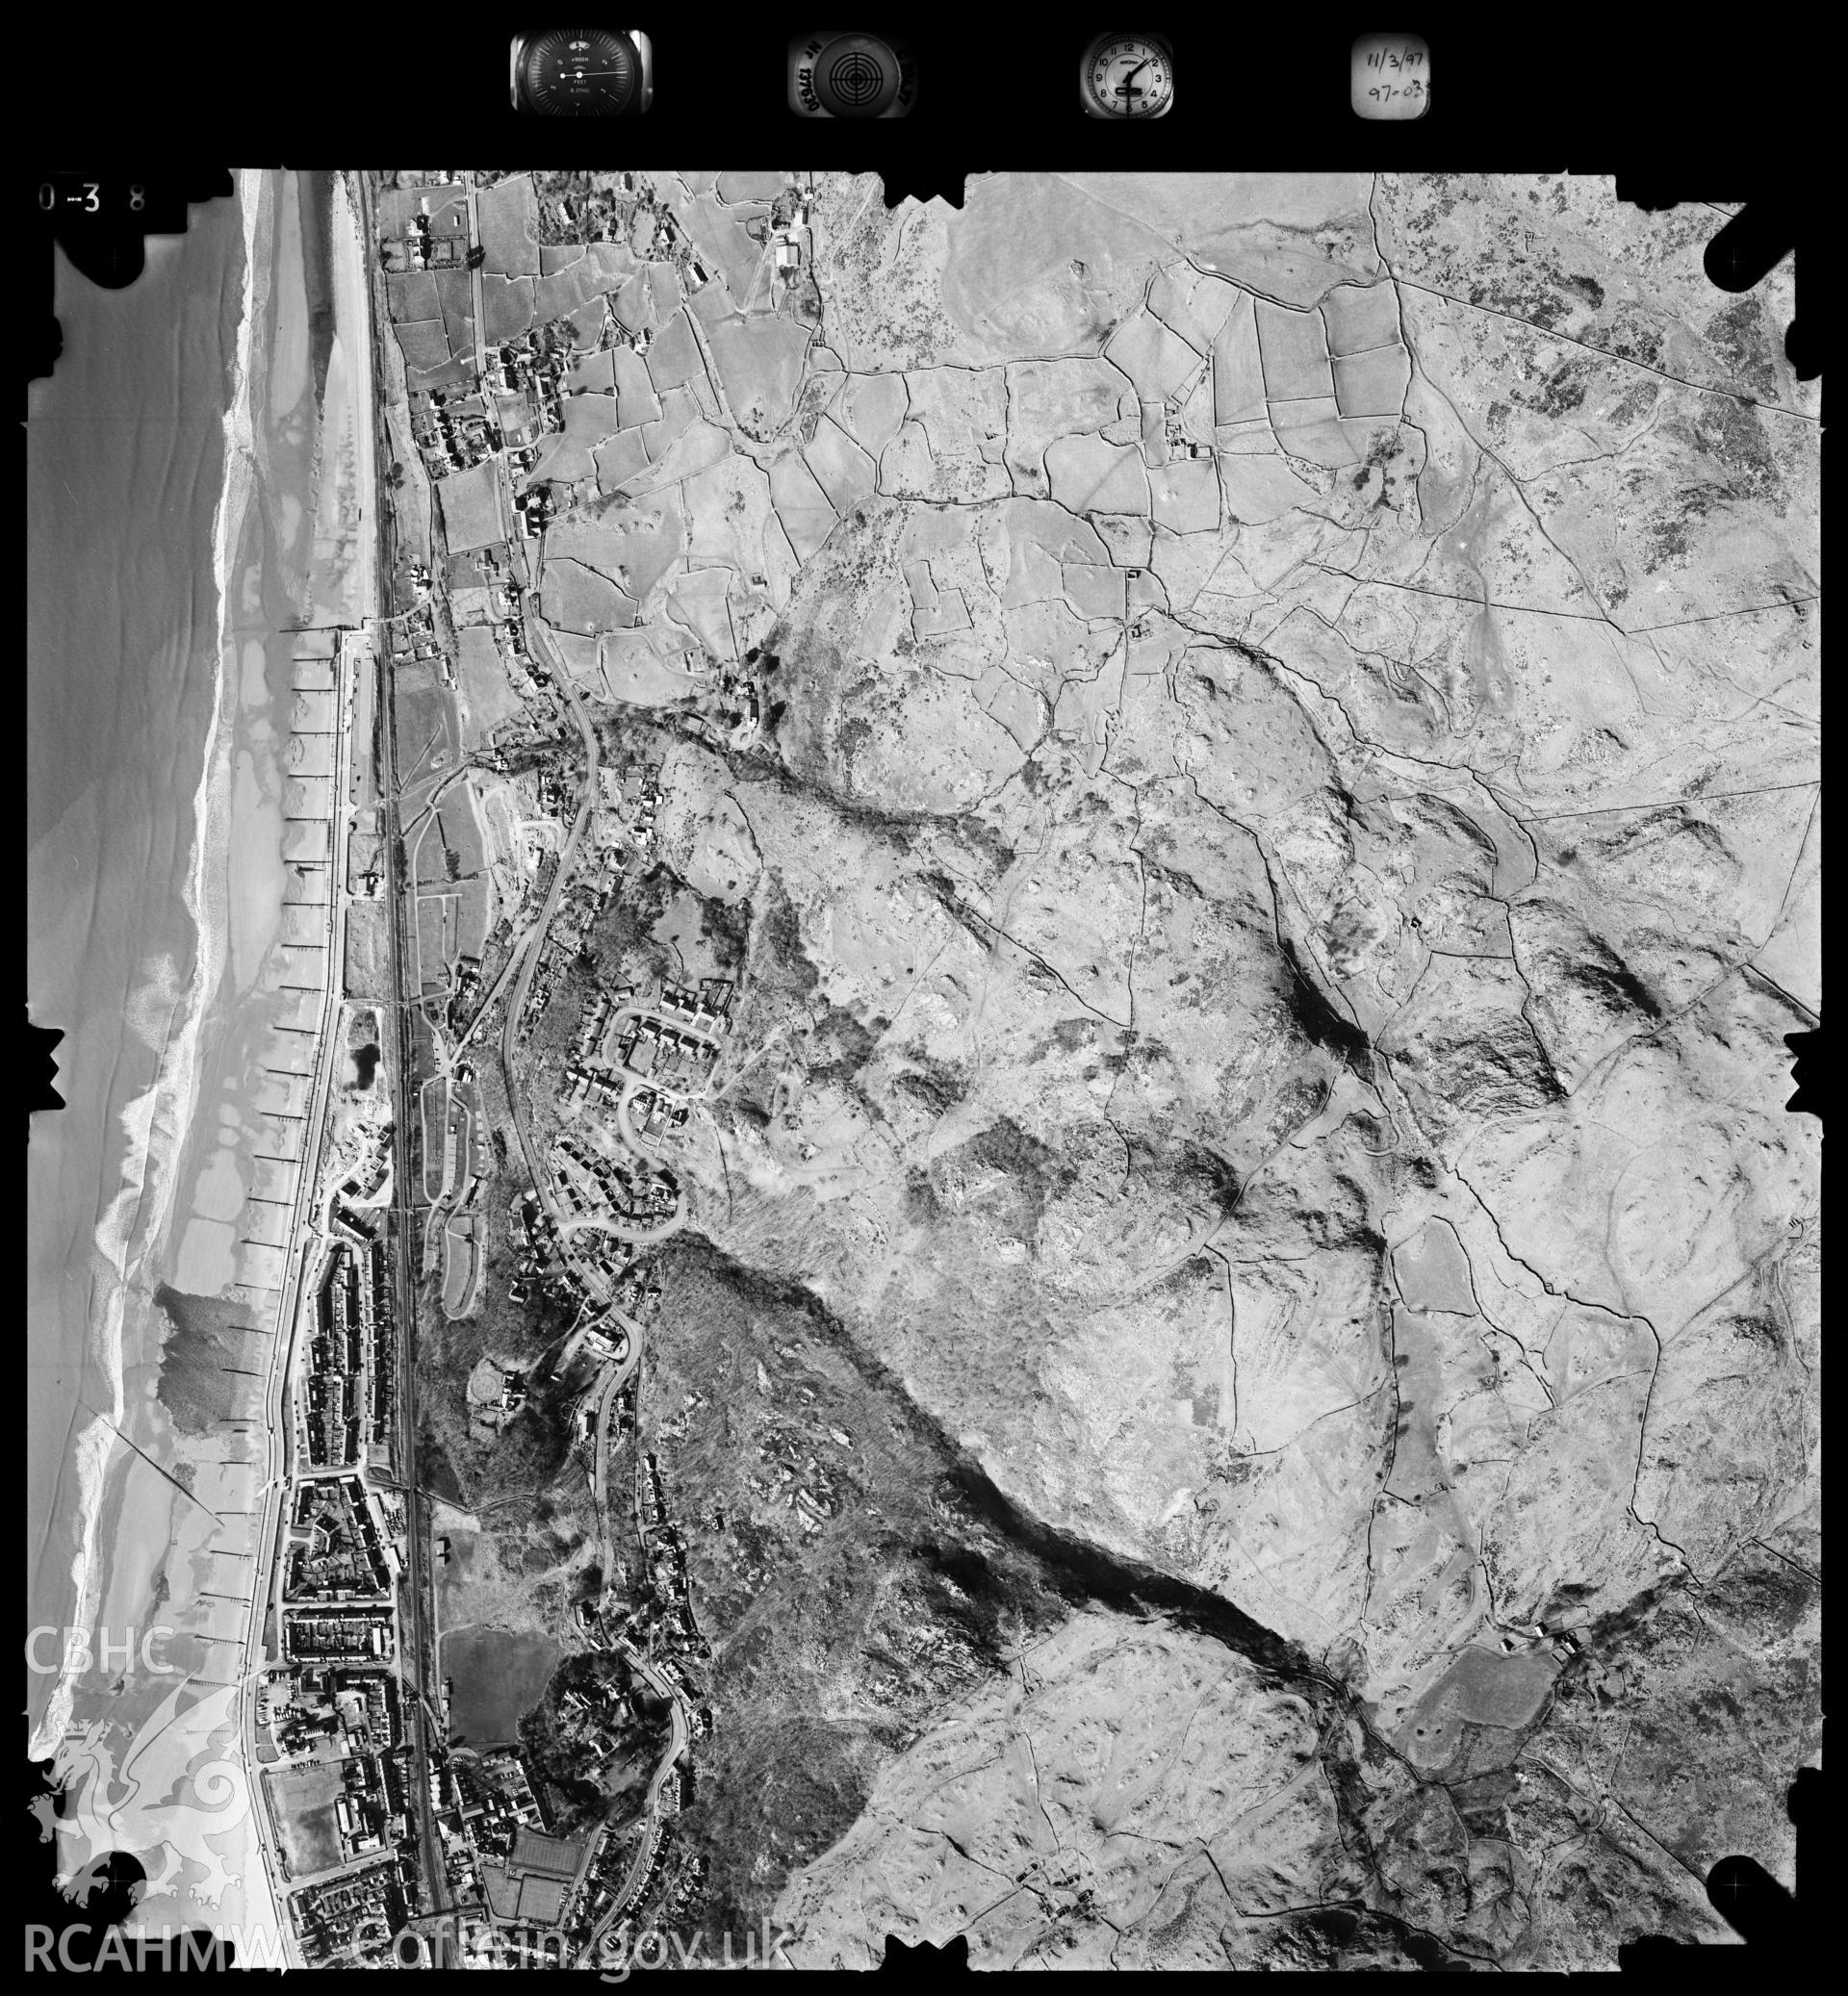 Digitized copy of an aerial photograph showing the Barmouth area, taken by Ordnance Survey, 1997.